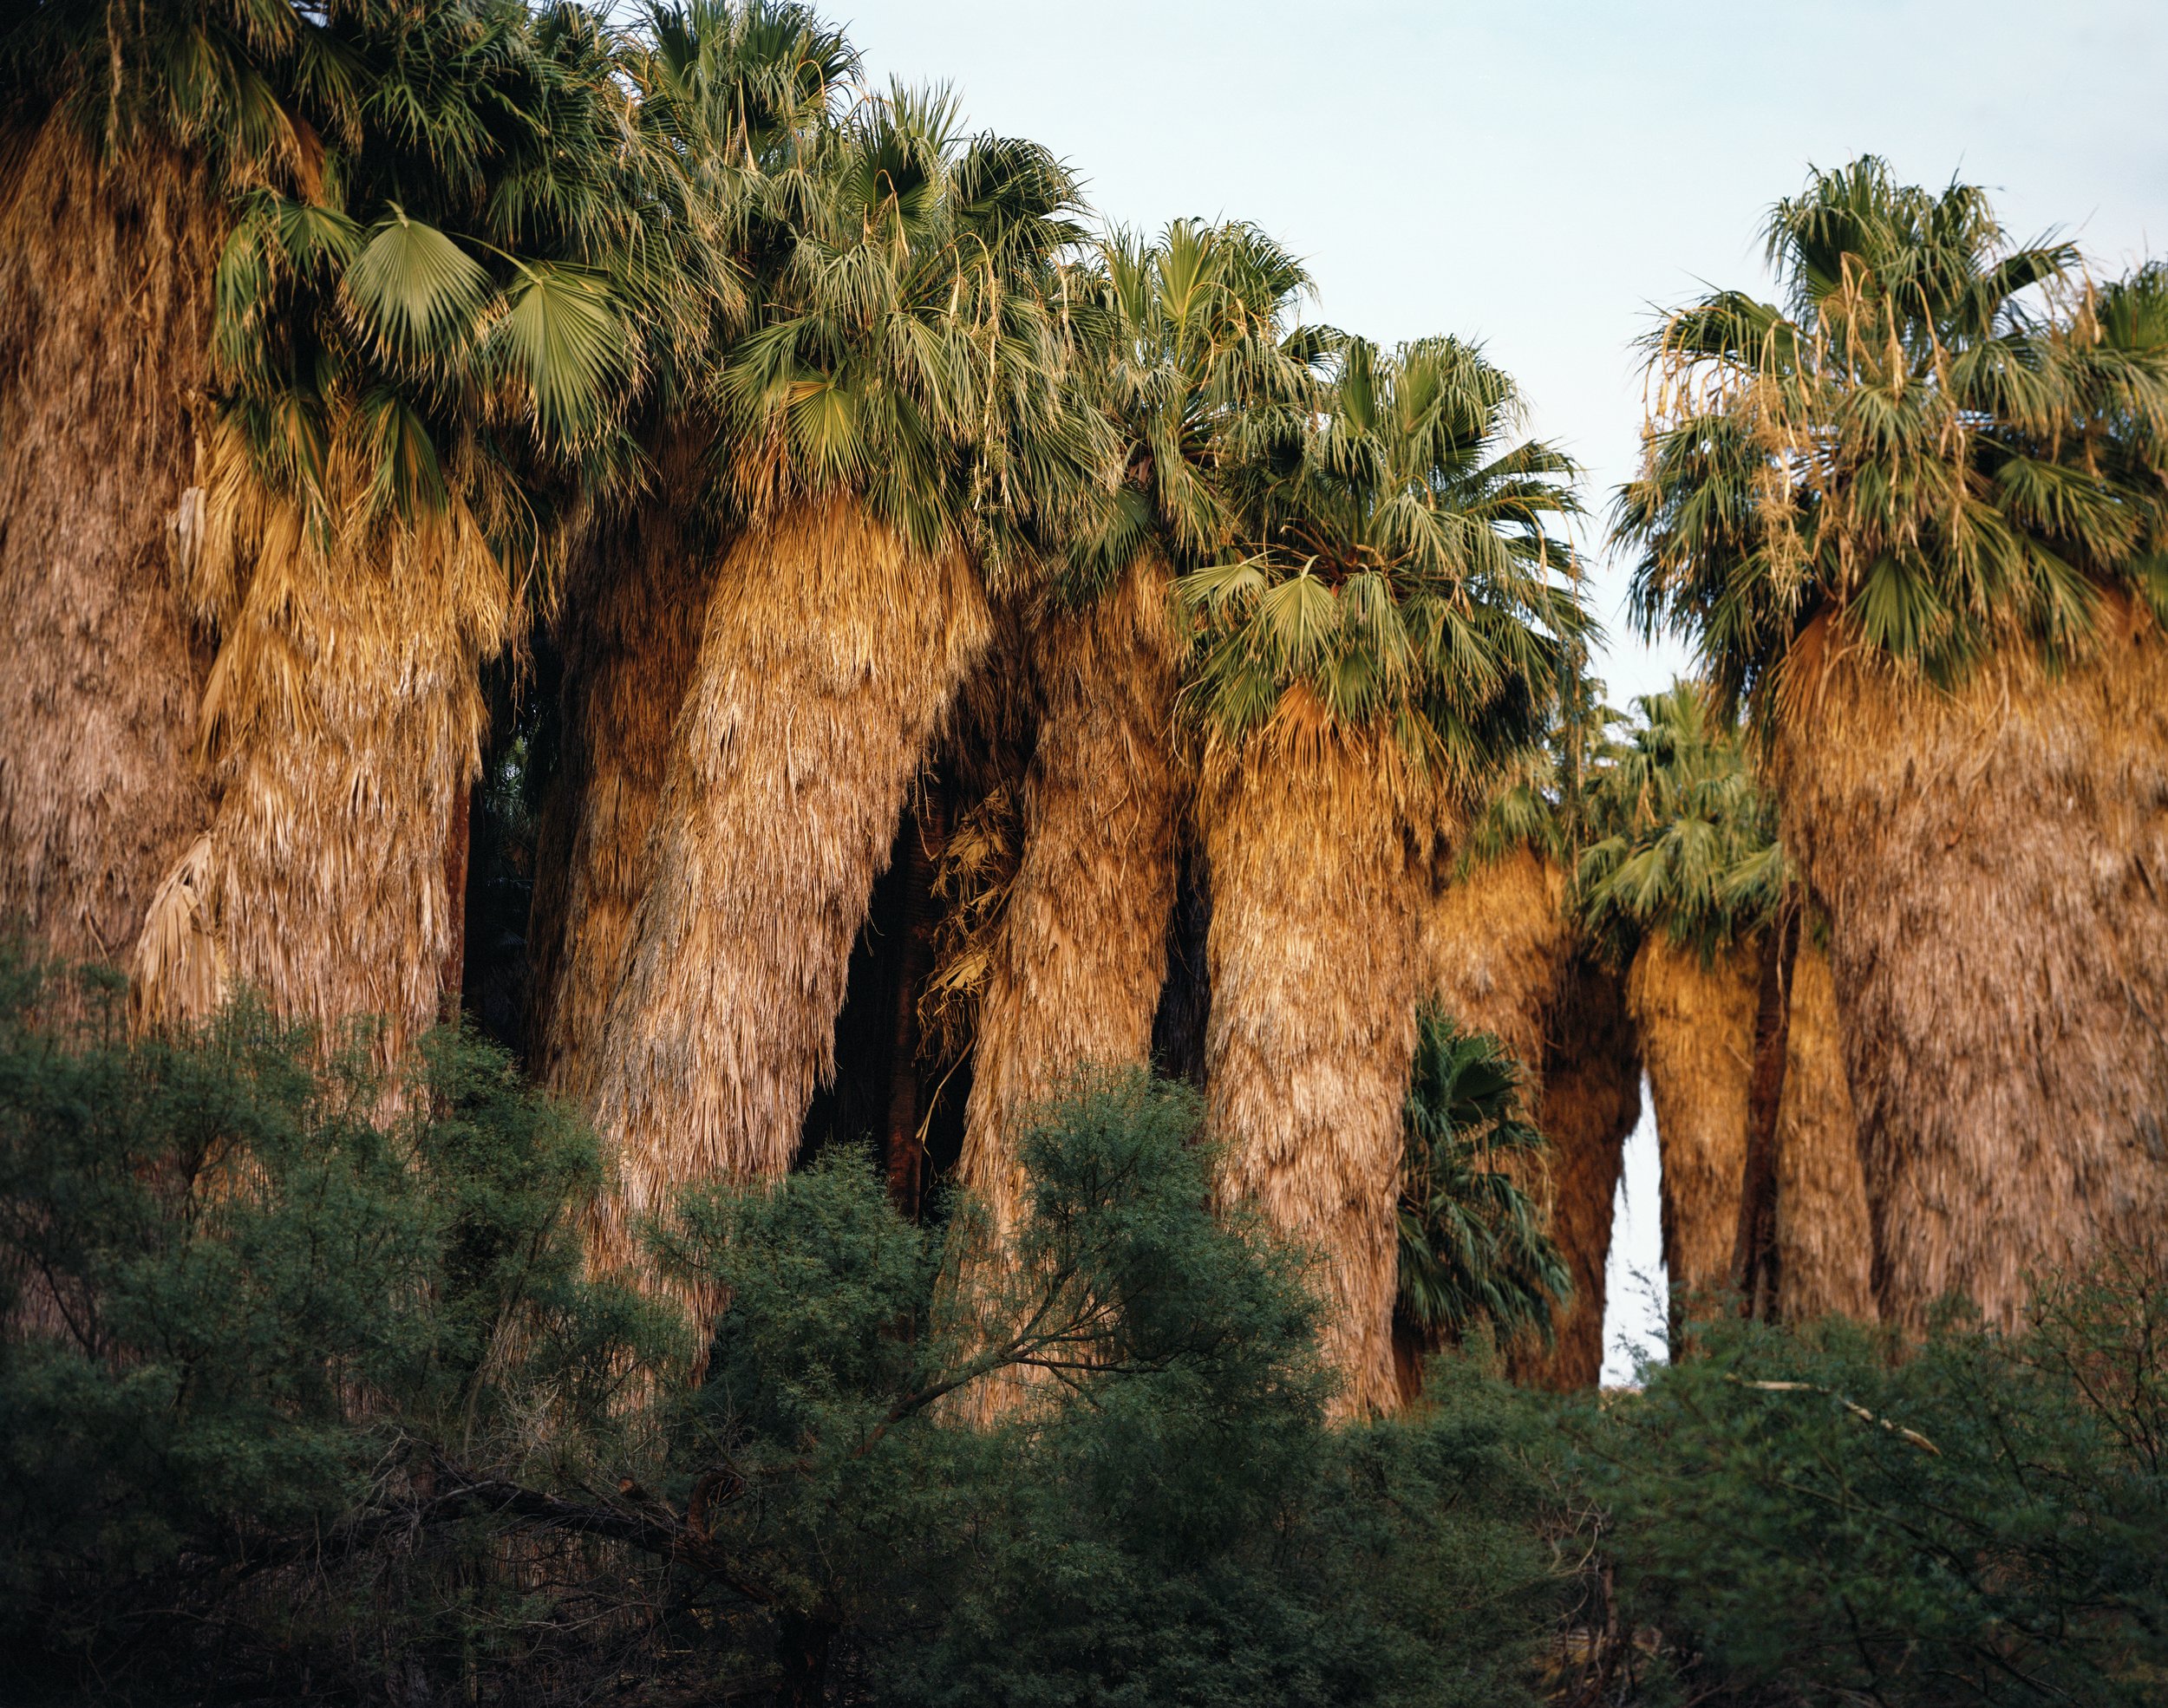  Palm Oasis, 2020 Archival pigment print   Writing    Film    Installation  